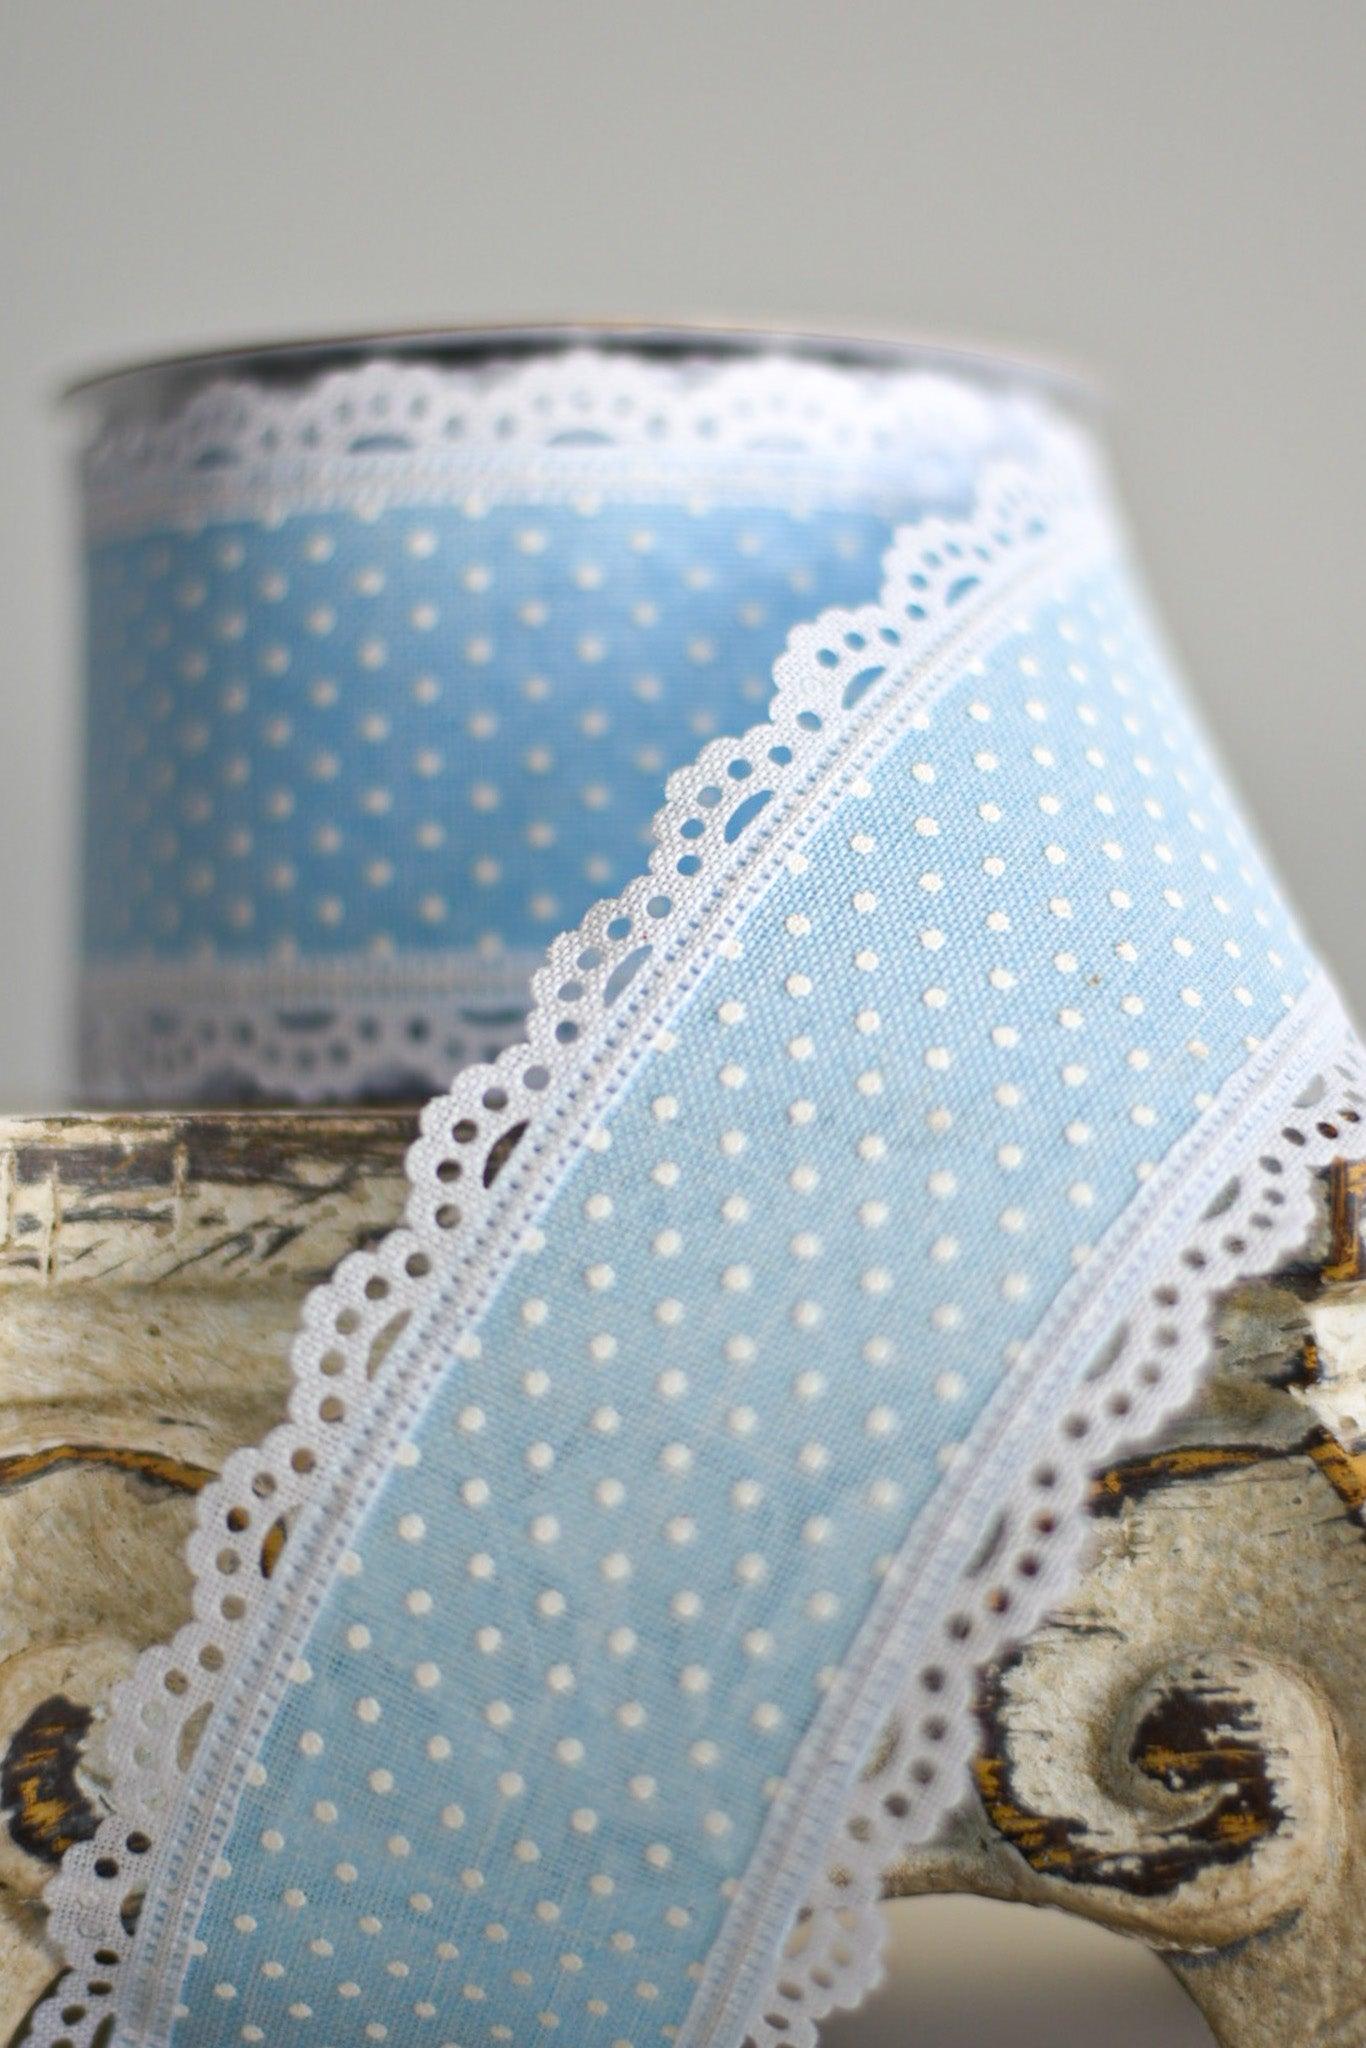 2.5"X10YD RAISED SWISS DOTS W/LACE PALE BLUE/WHITE - Burlap and Bling Decor